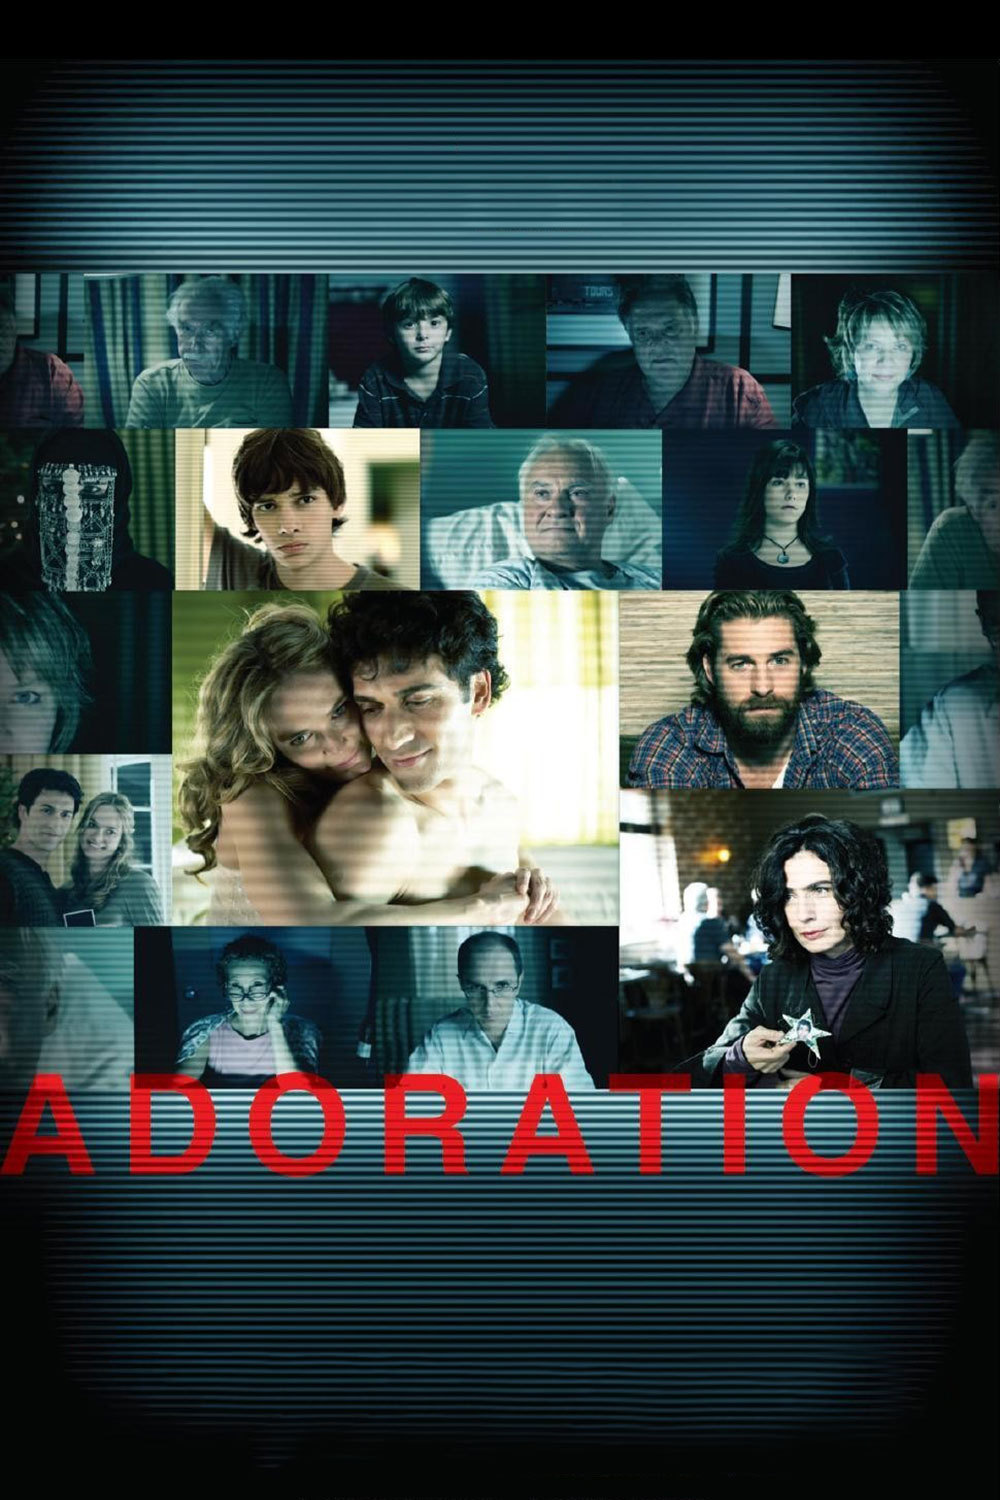 Poster for the movie "Adoration"